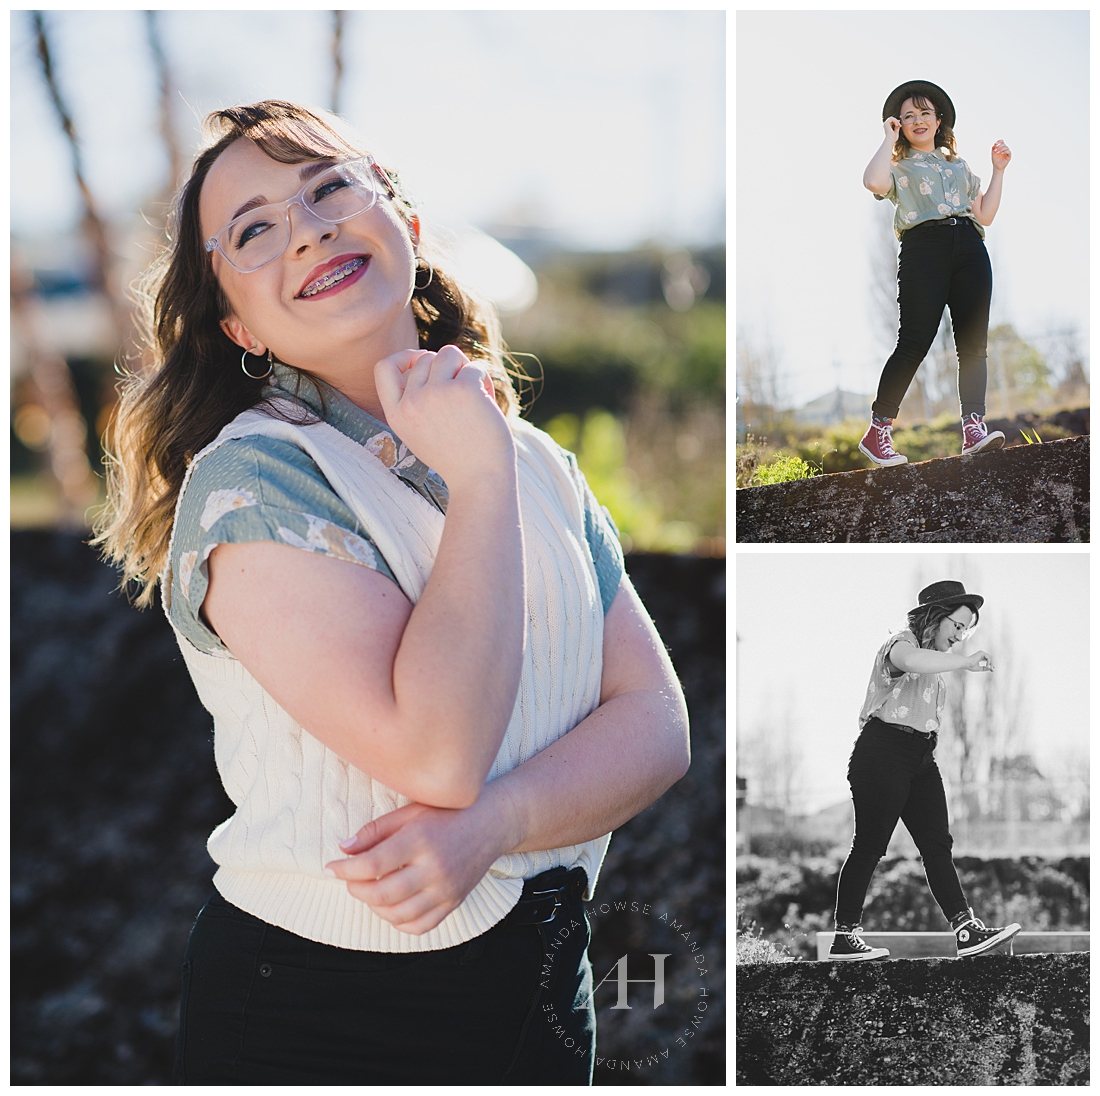 Cute Outdoor Senior Photos | Tacoma Senior, Spring Outfit Inspiration | Photographed by the Best Tacoma Senior Photographer Amanda Howse Photography